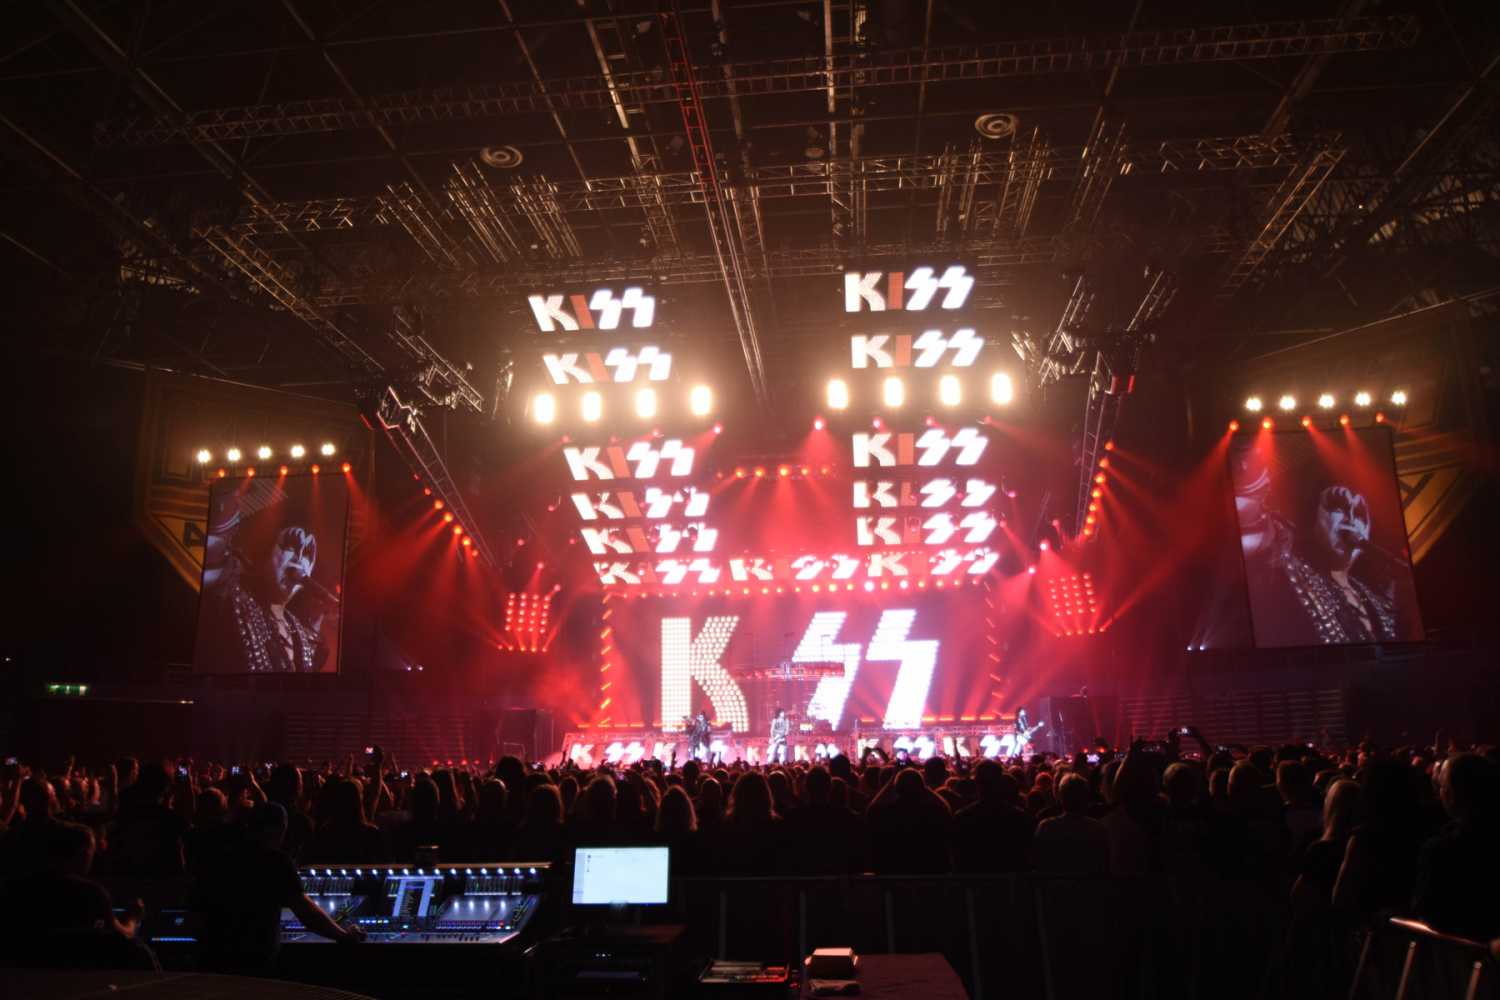 PRG are supplying a similar video rig as the Kiss tour continues in North America until September